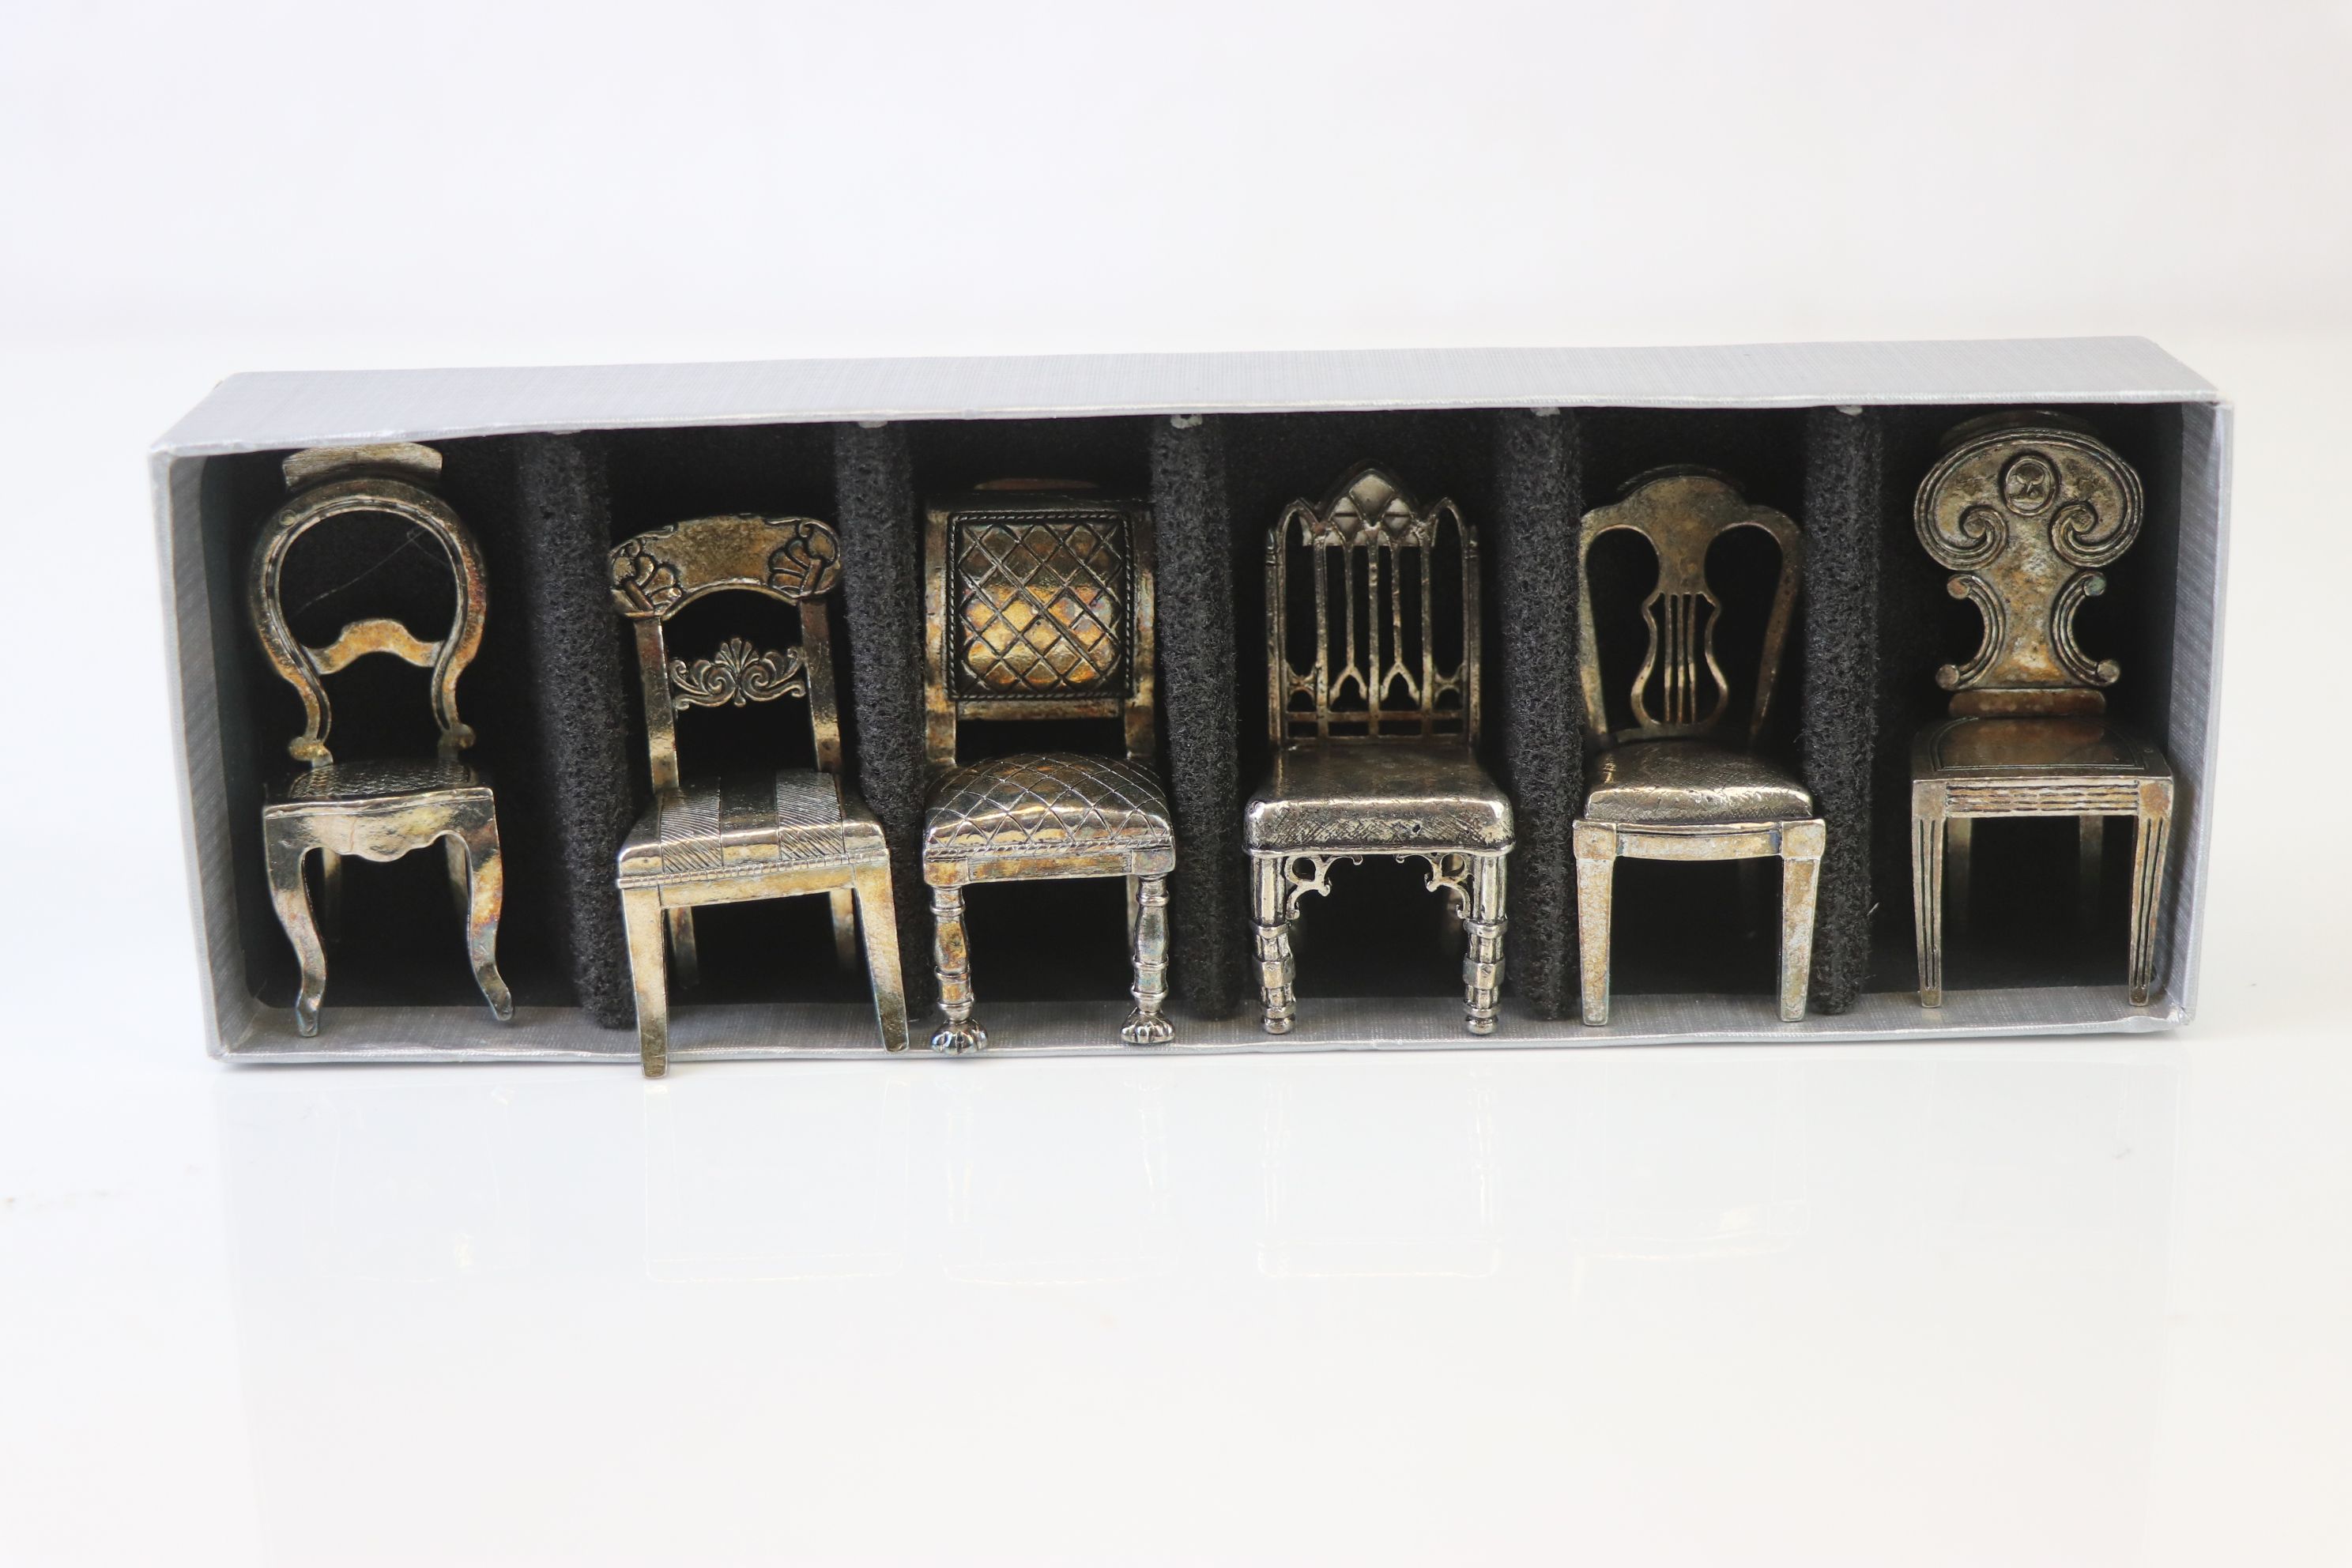 Set of Six Silver Plate Menu / Card Holders in the design of Chairs - Image 7 of 7